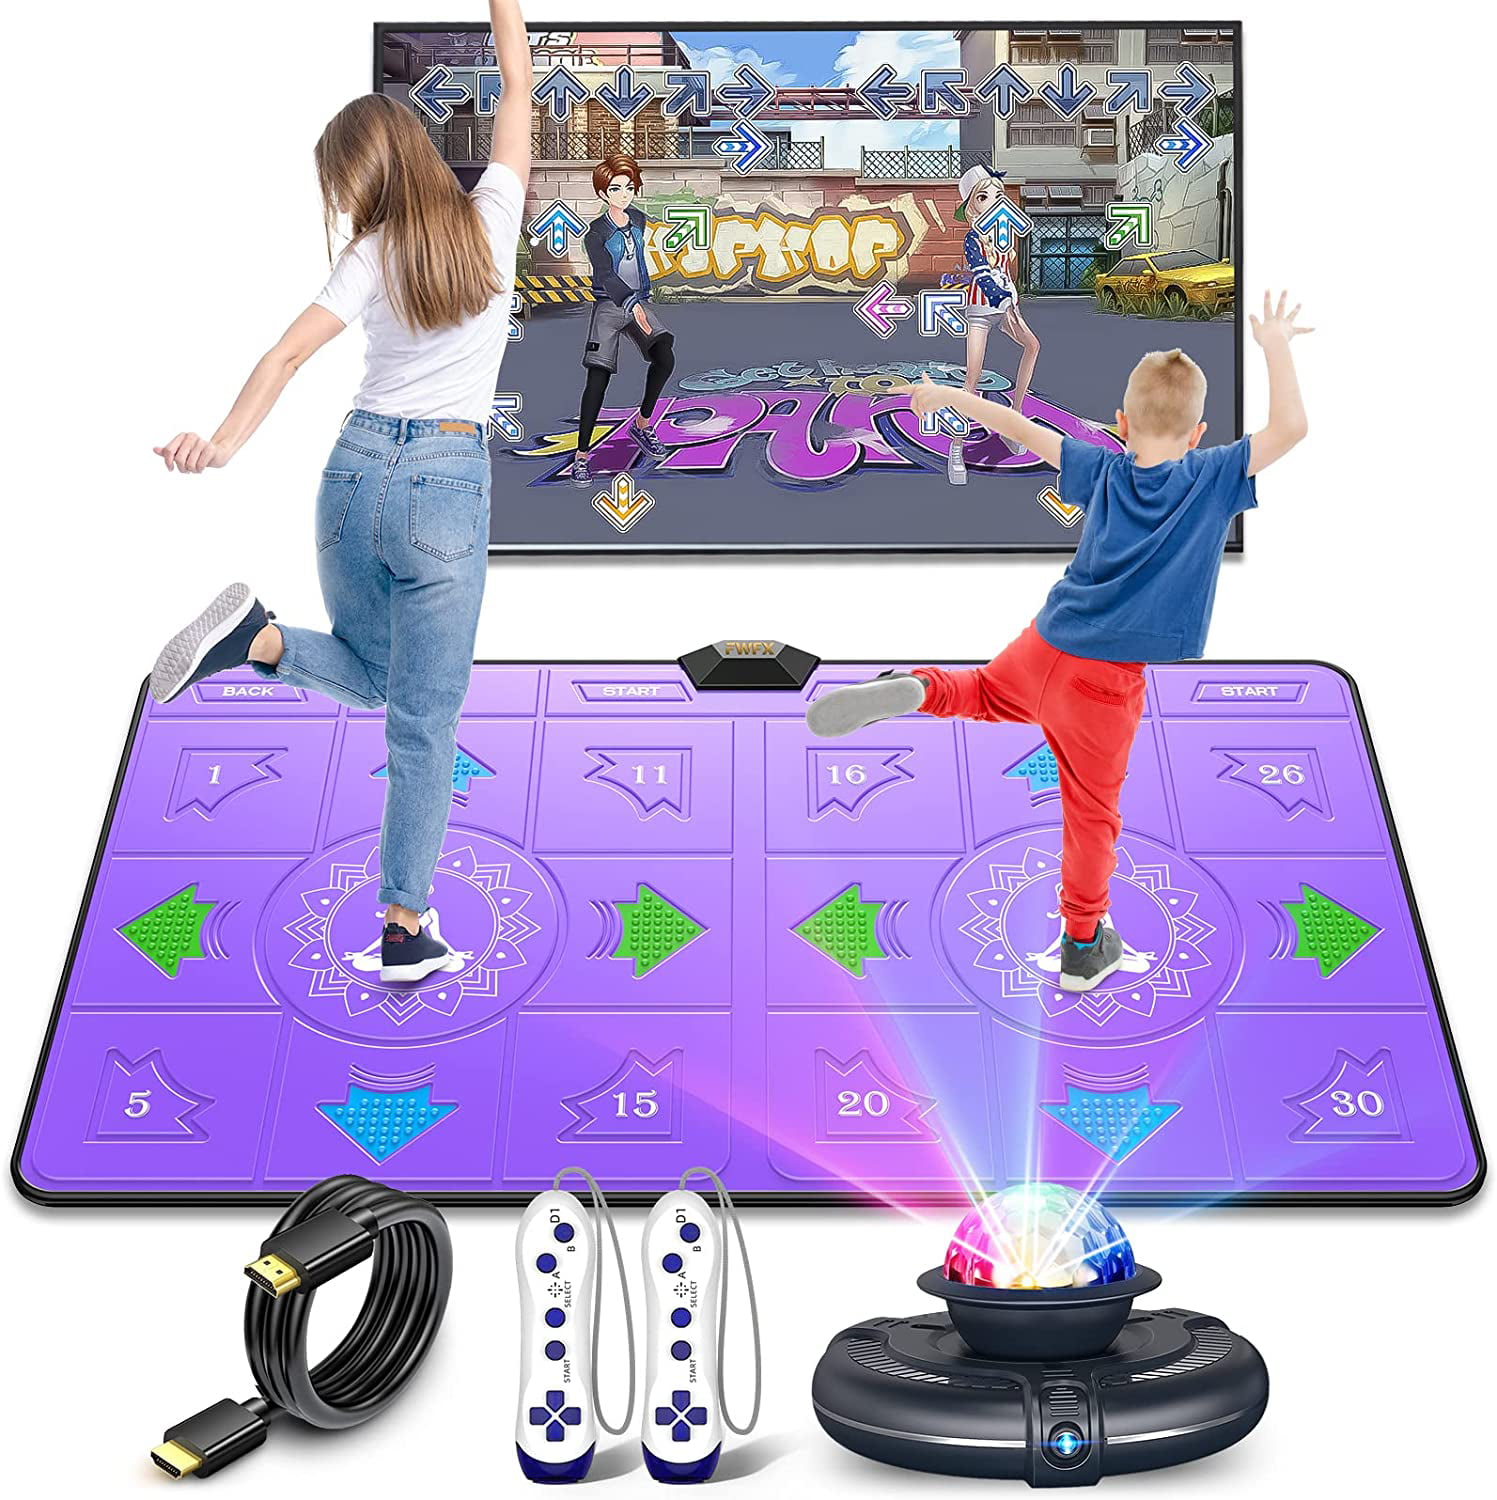 Musical Dancing Toys with 5 Game Modes Electronic Dancing Pad with LED Lights VVVIKU Dance Mat Anti-Slip Step Play Mat with Build-in Music Birthday Gifts Toys for Girls Boys Kids Age 3+ 